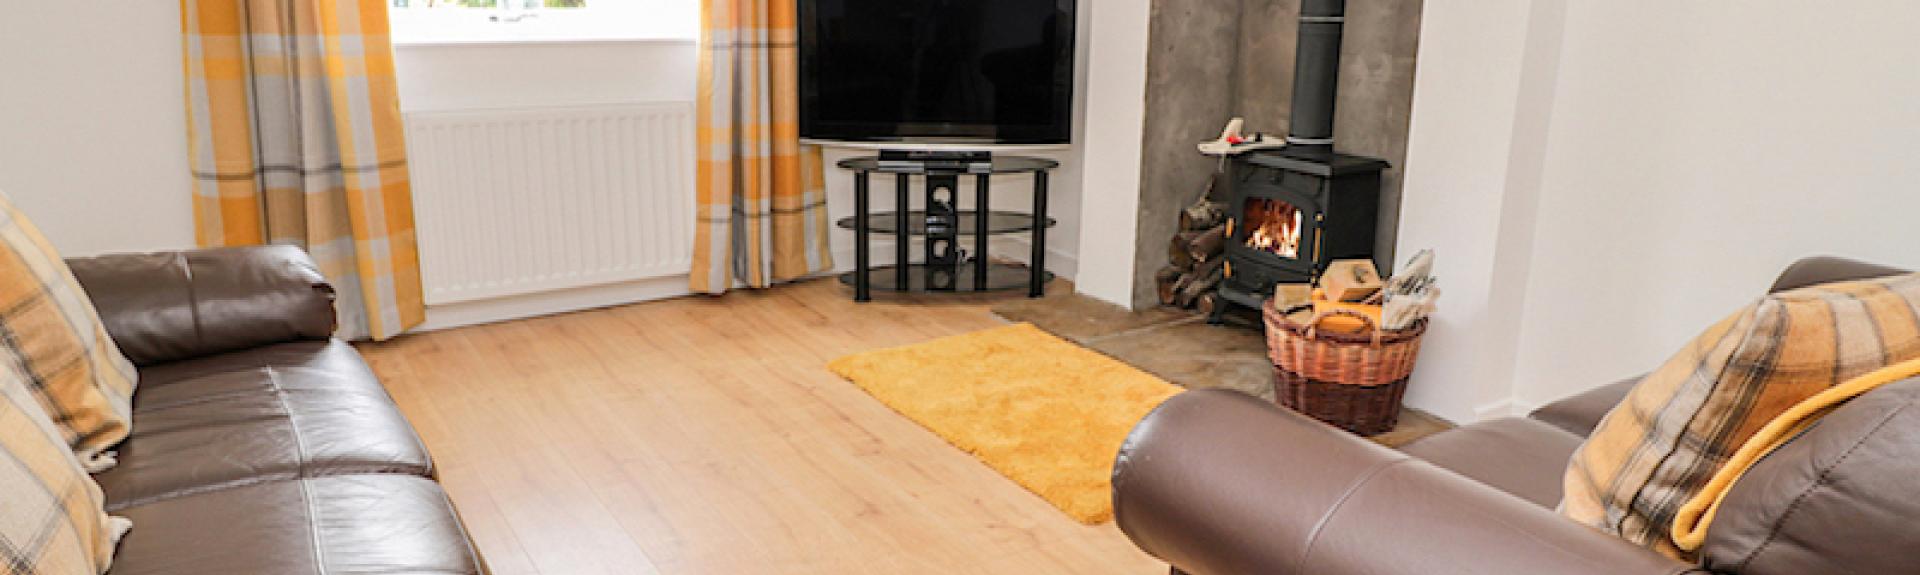 A spacious wooden floored lounge with twin sofas, TV and a woodburner.